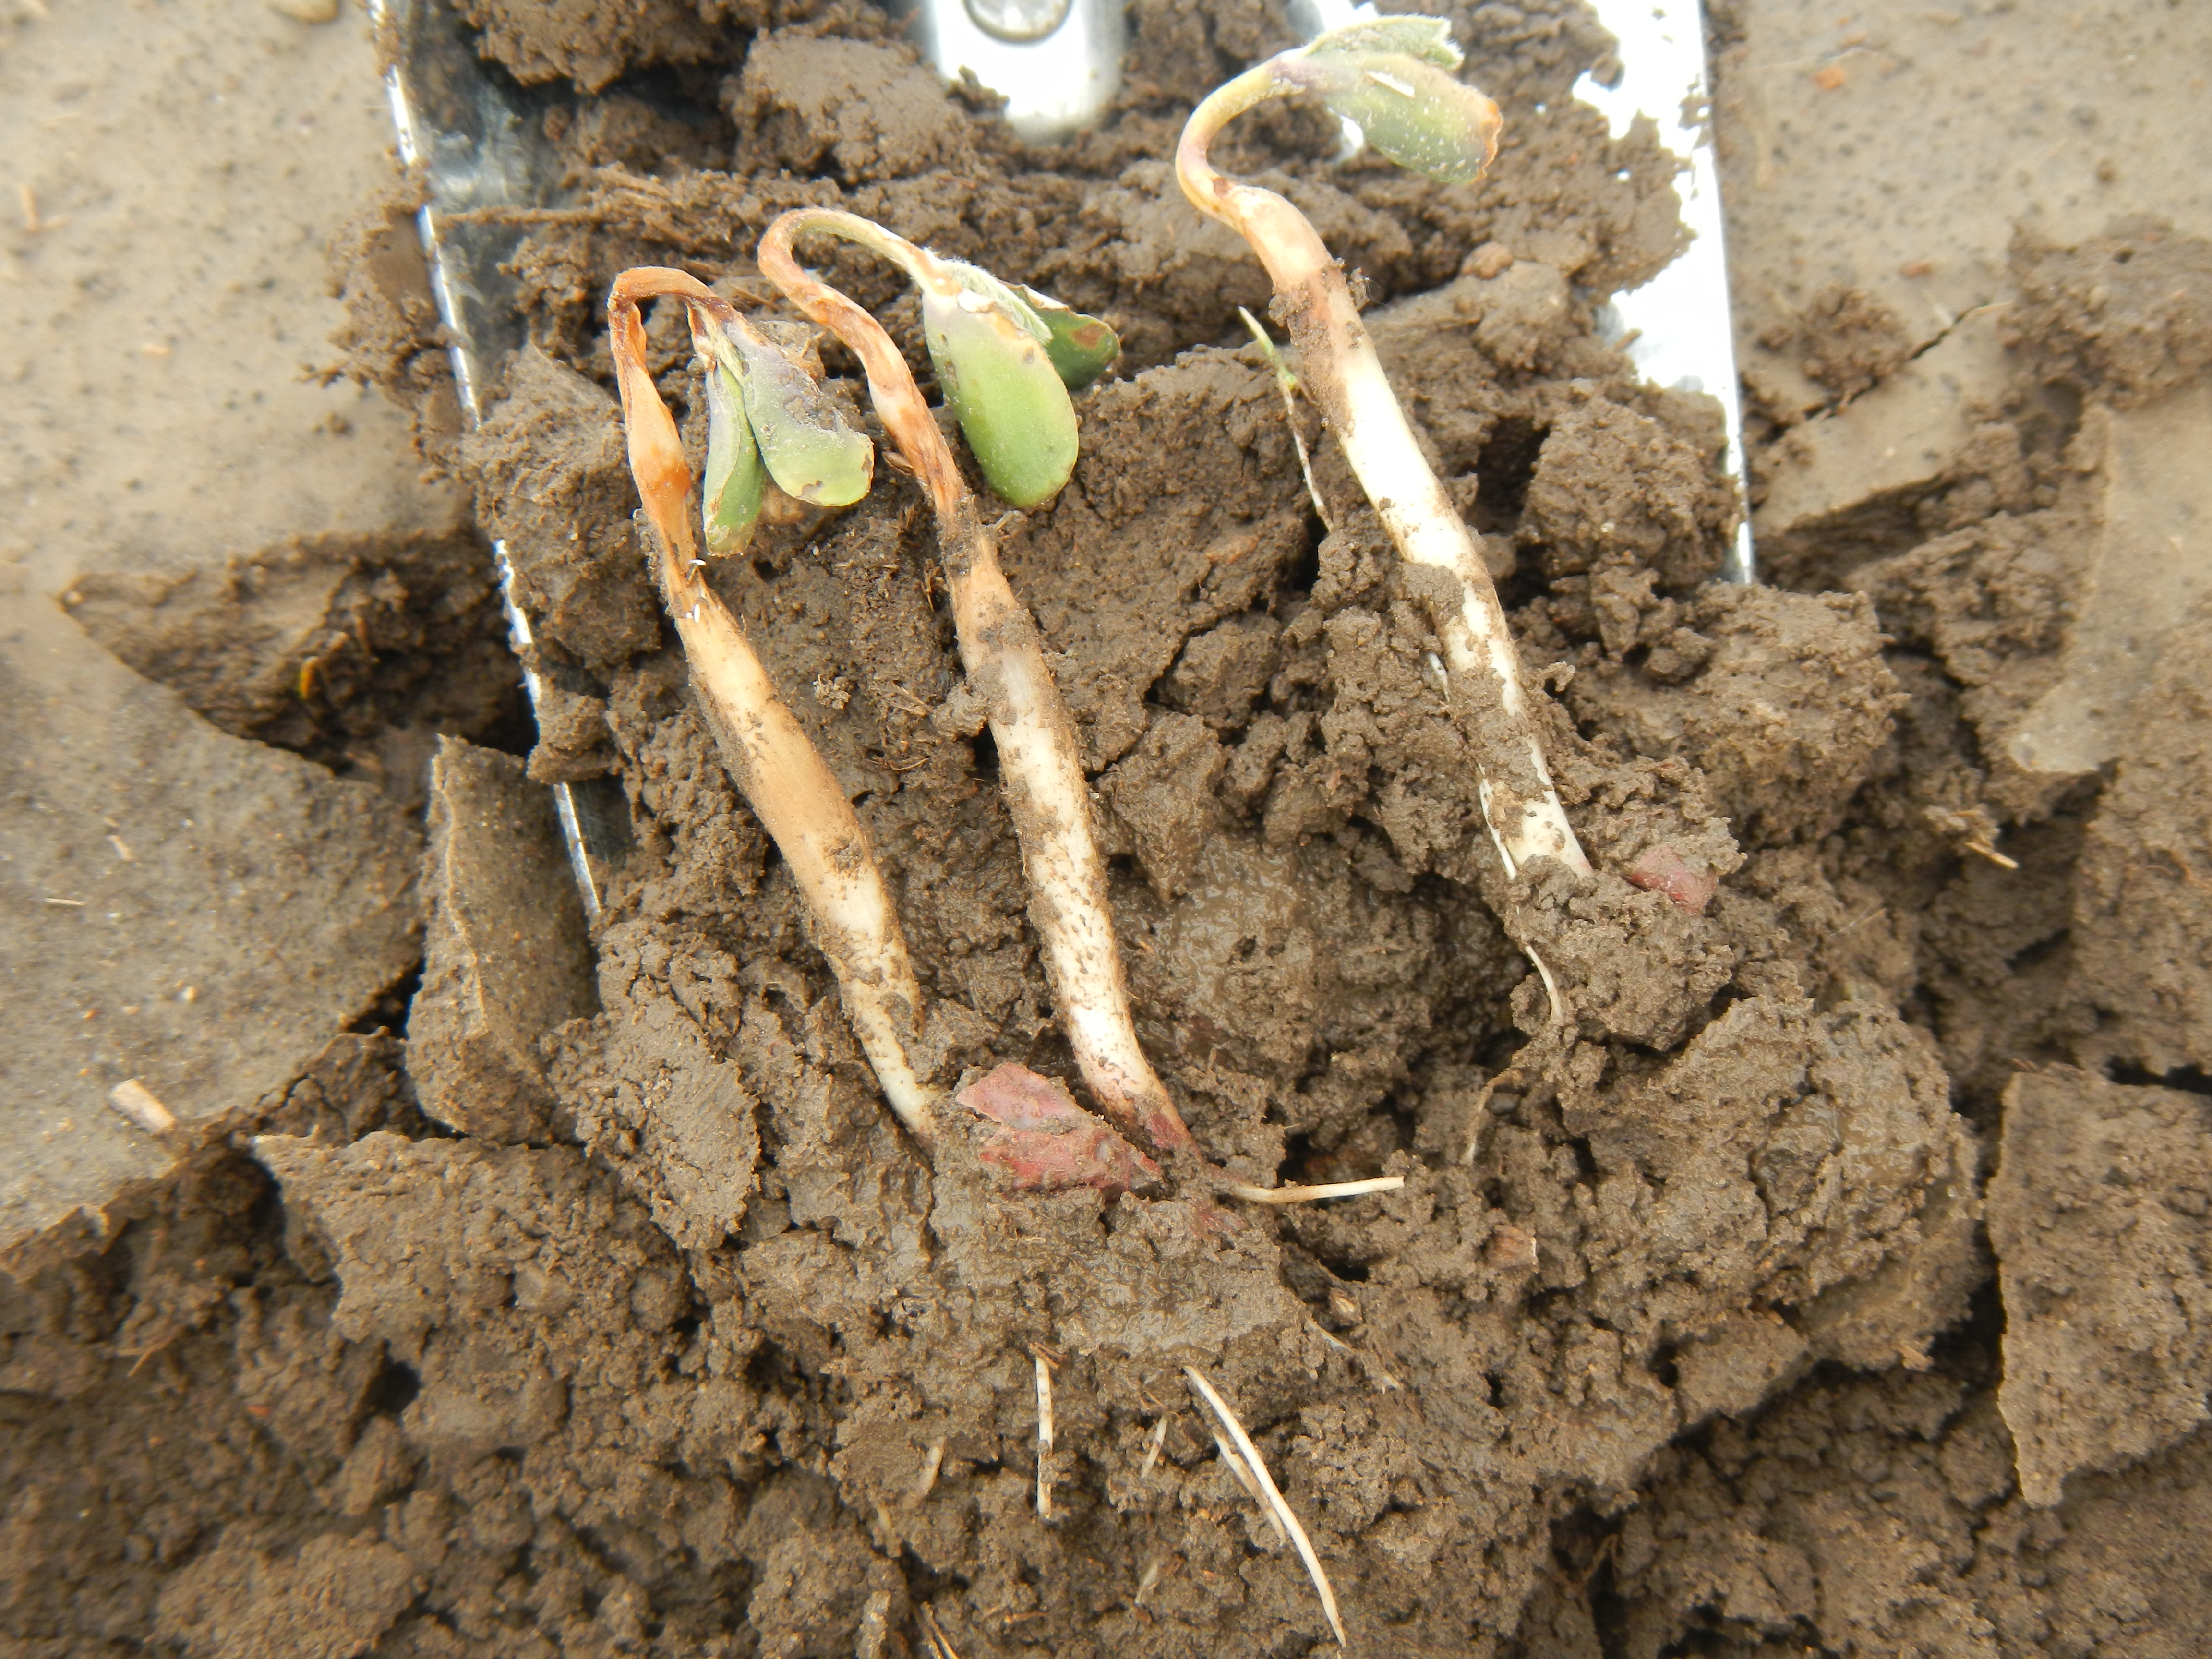 Symptoms of PPO-inhibitor herbicide damage on soybean seedlings.